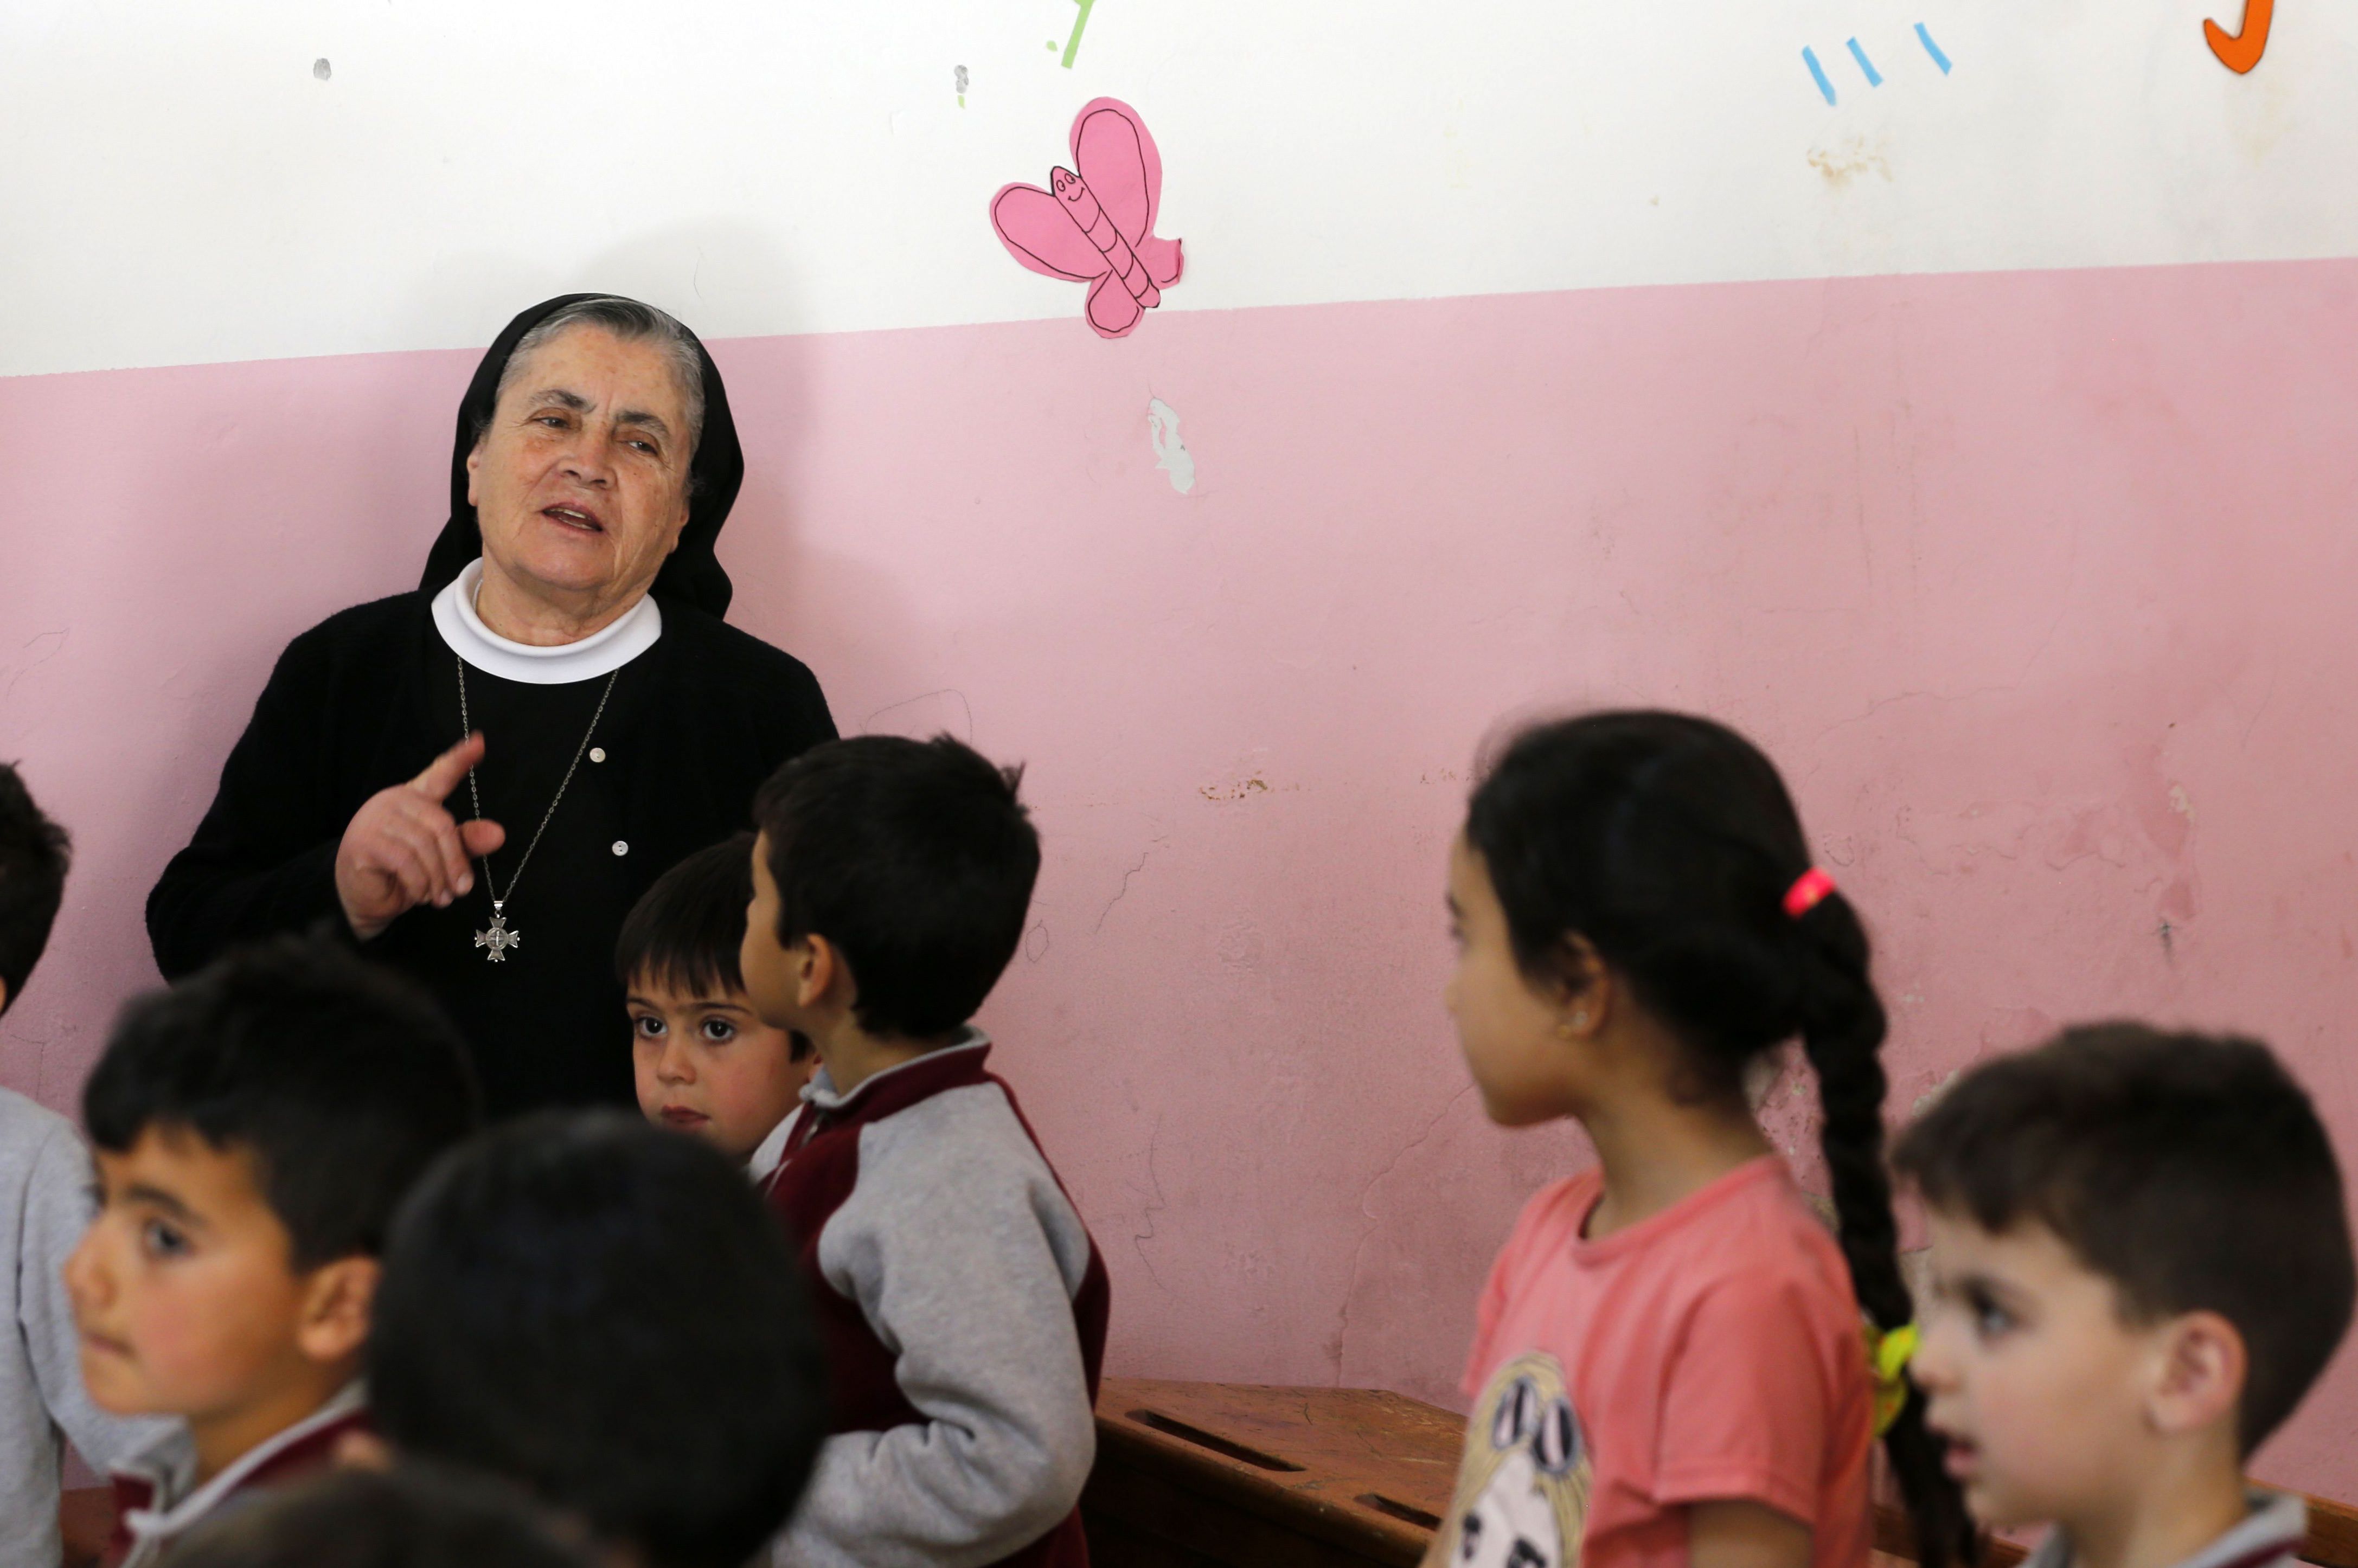 Angel Allam, a nun and teacher, instructs her students in the Aramaic language